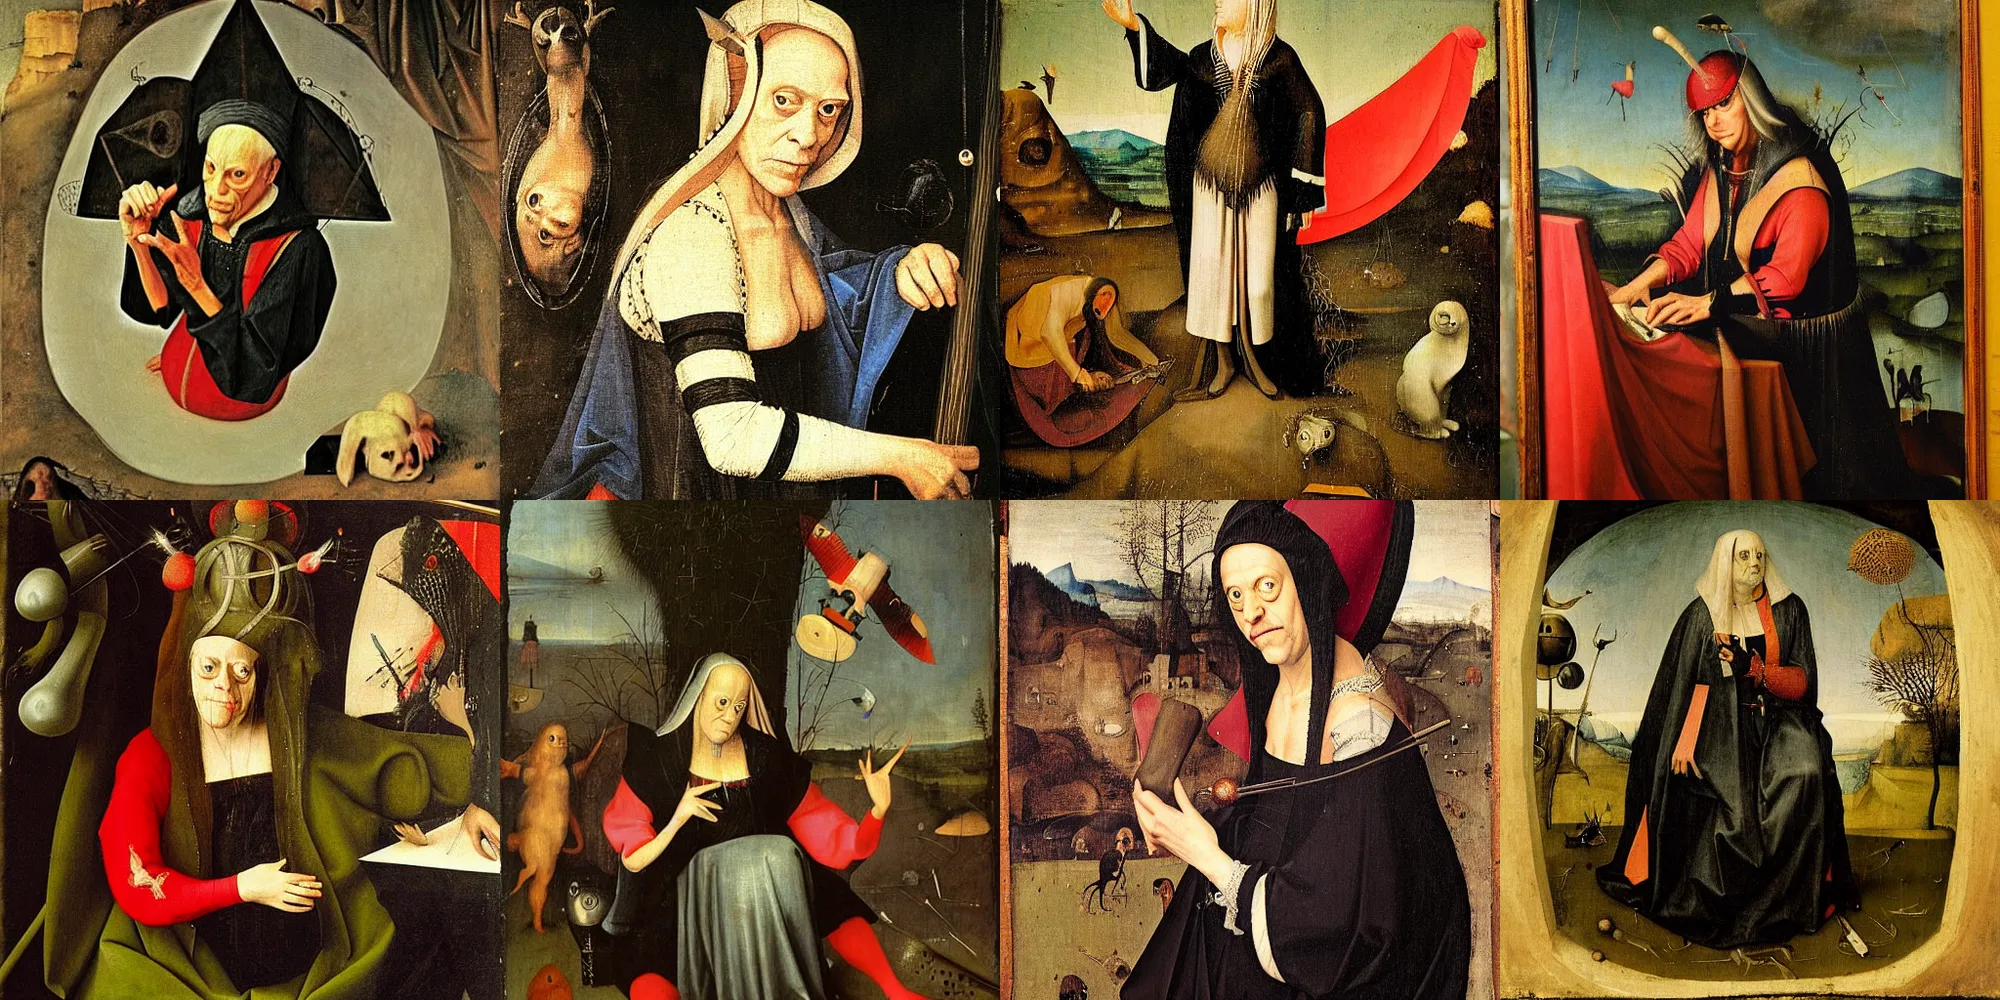 Prompt: Renaissance portrait of Genesis P-Orridge performing on stage, painted by Hieronymus Bosch